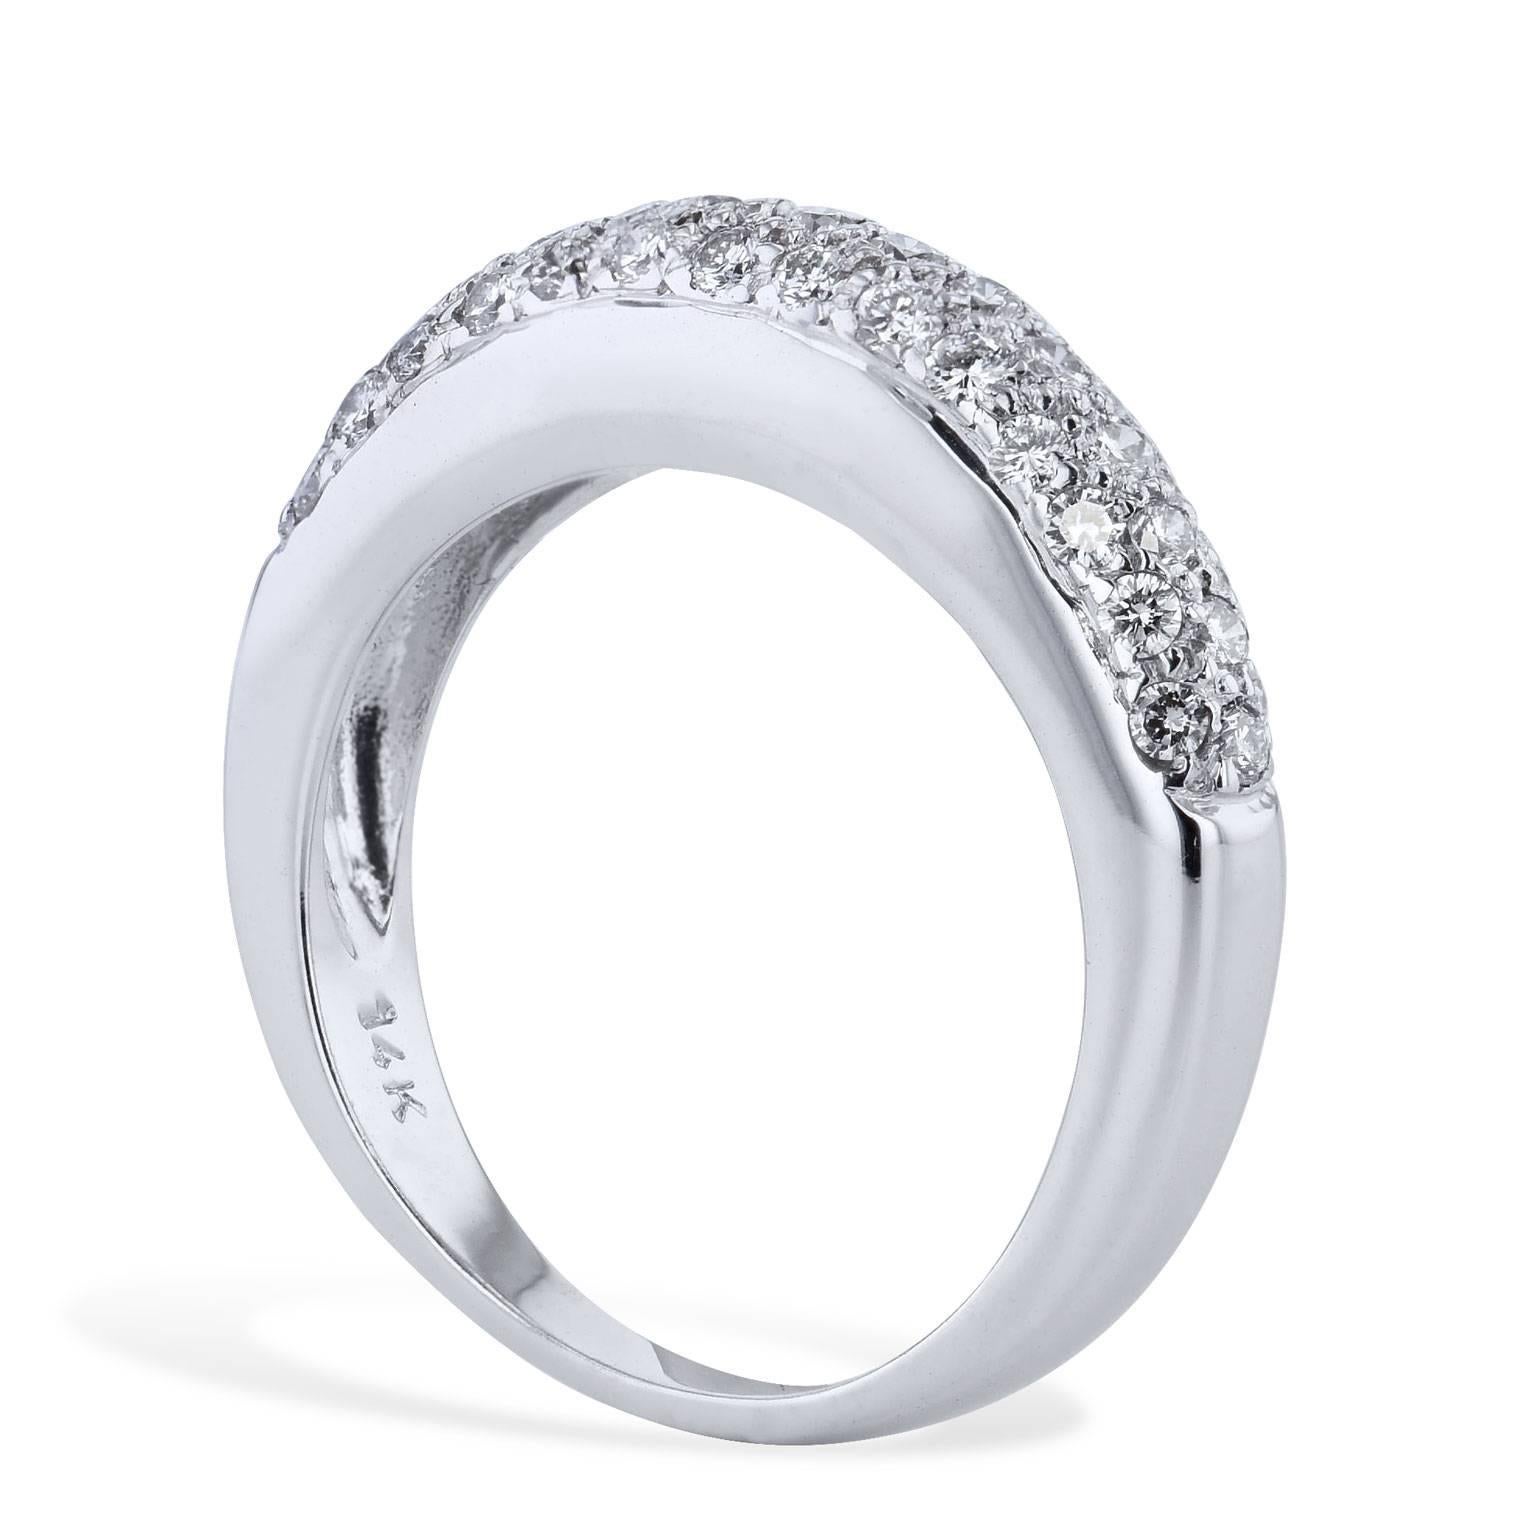 0.50 Carat Pave Set Diamond 14 karat White Gold Band Ring Size 5

Enjoy this 14 karat white gold diamond band featuring 0.50 carat of pave-set diamond (G/H/SI1).

Currently a size 5

Complimentary sizing available upon request although with this